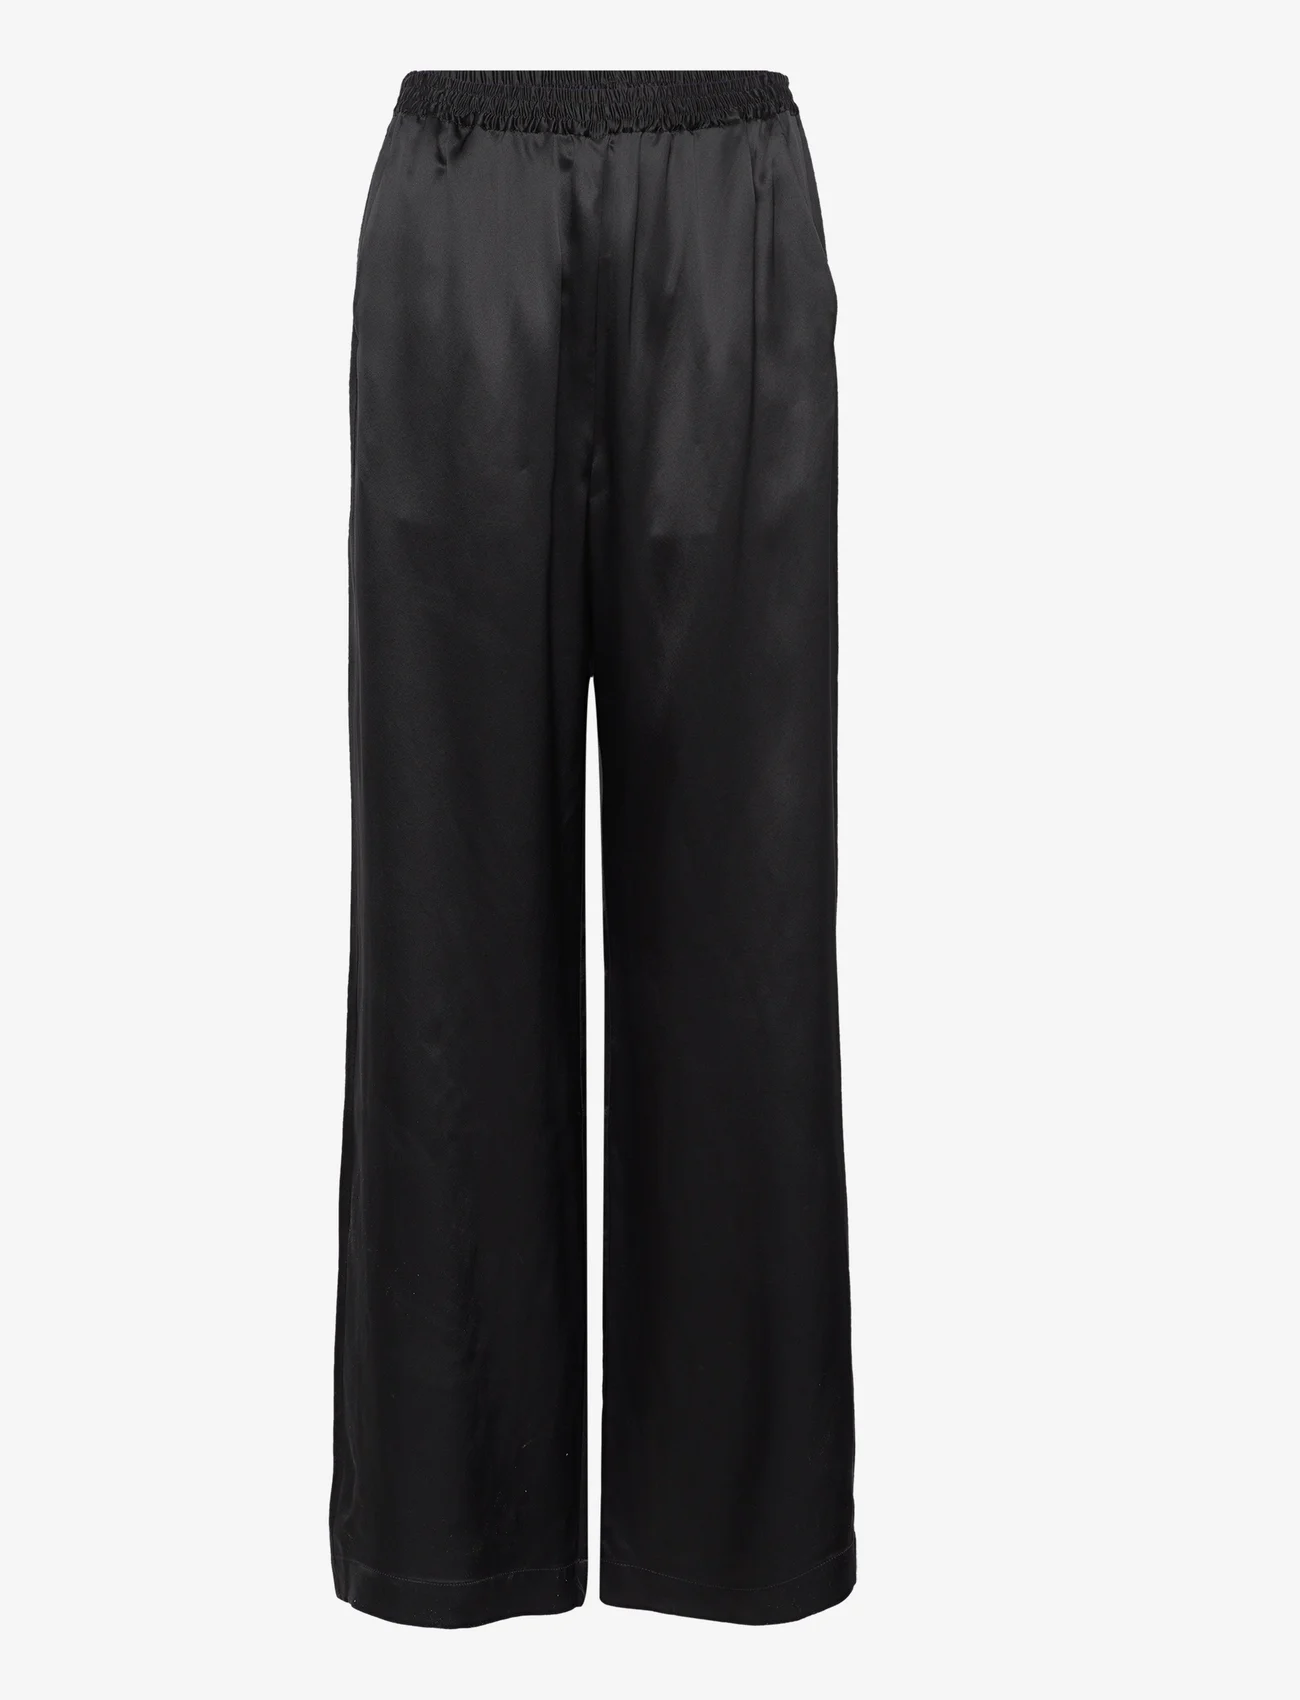 Wood Wood - Florence trousers - black - 0